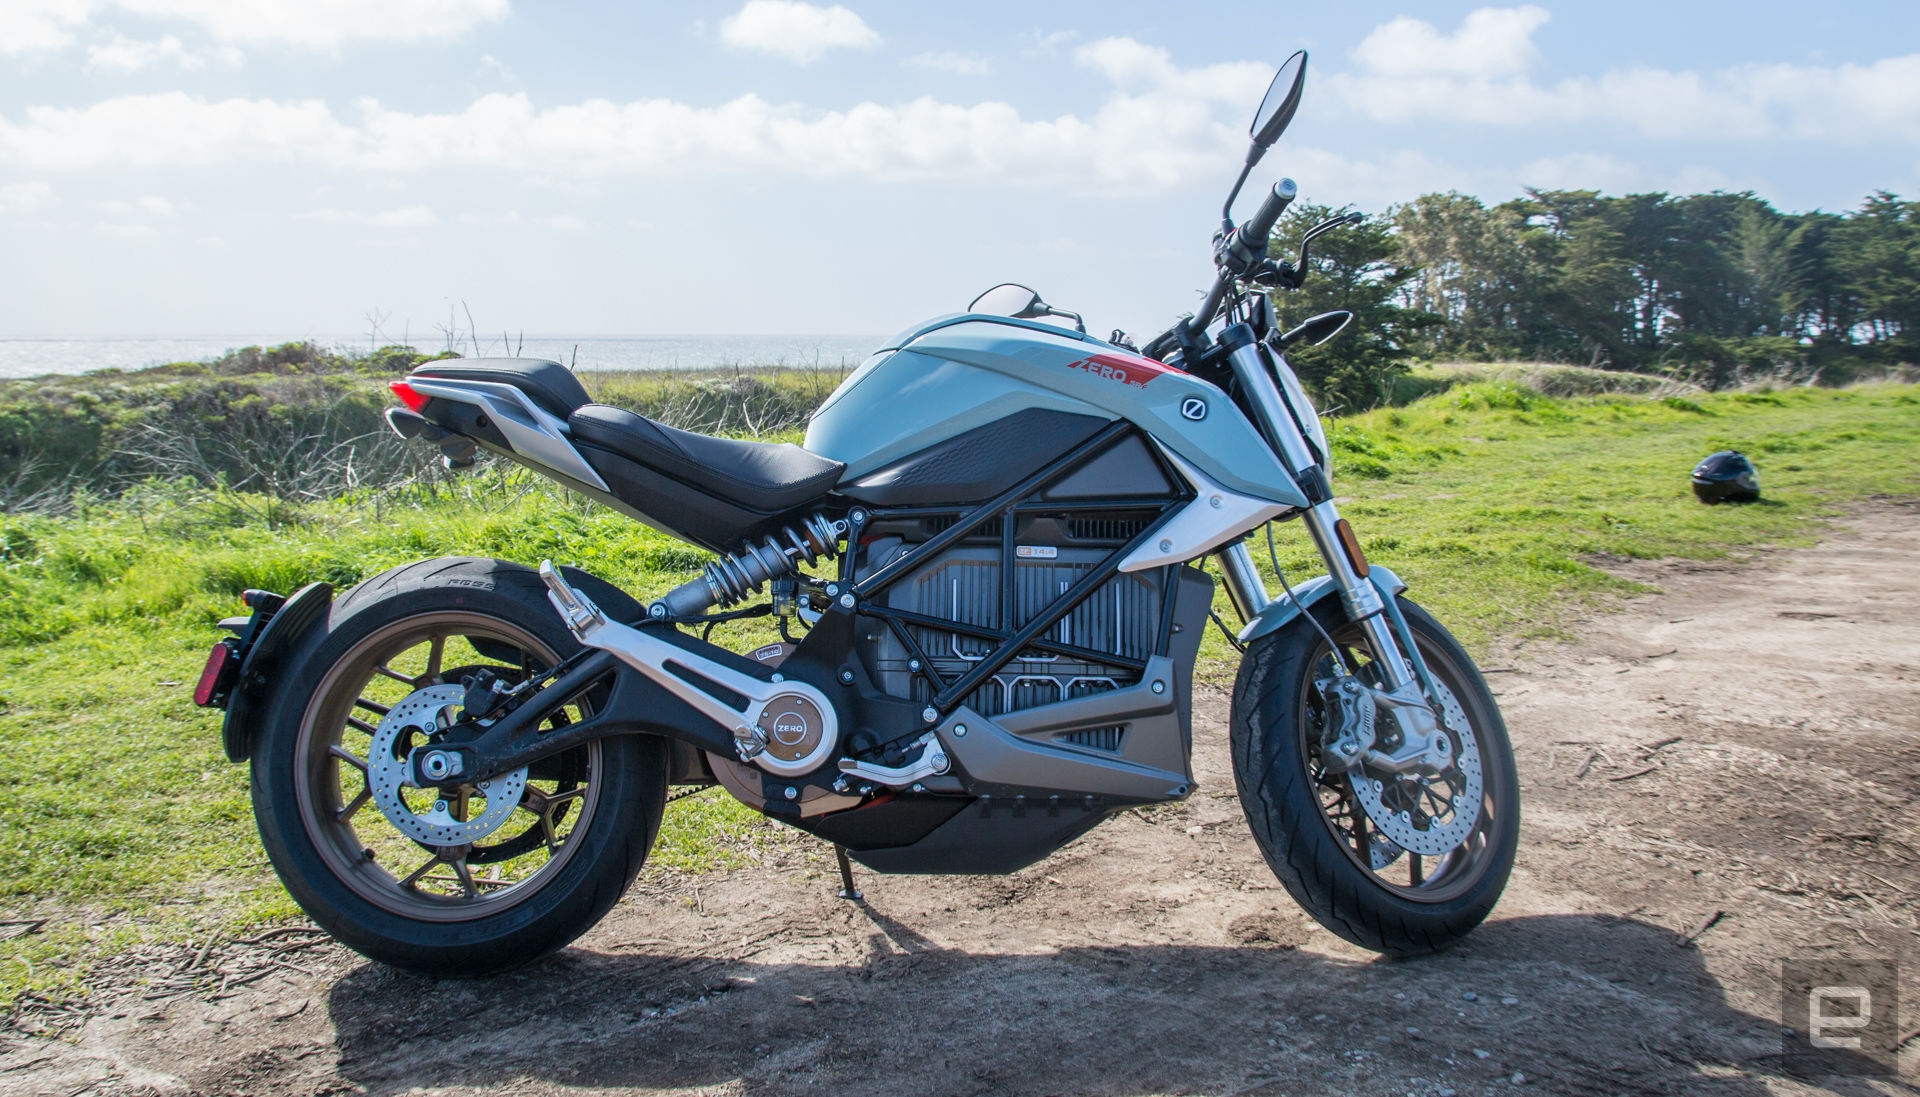 Zero’s SF/R electric motorcycle is quicker and now more connected | DeviceDaily.com